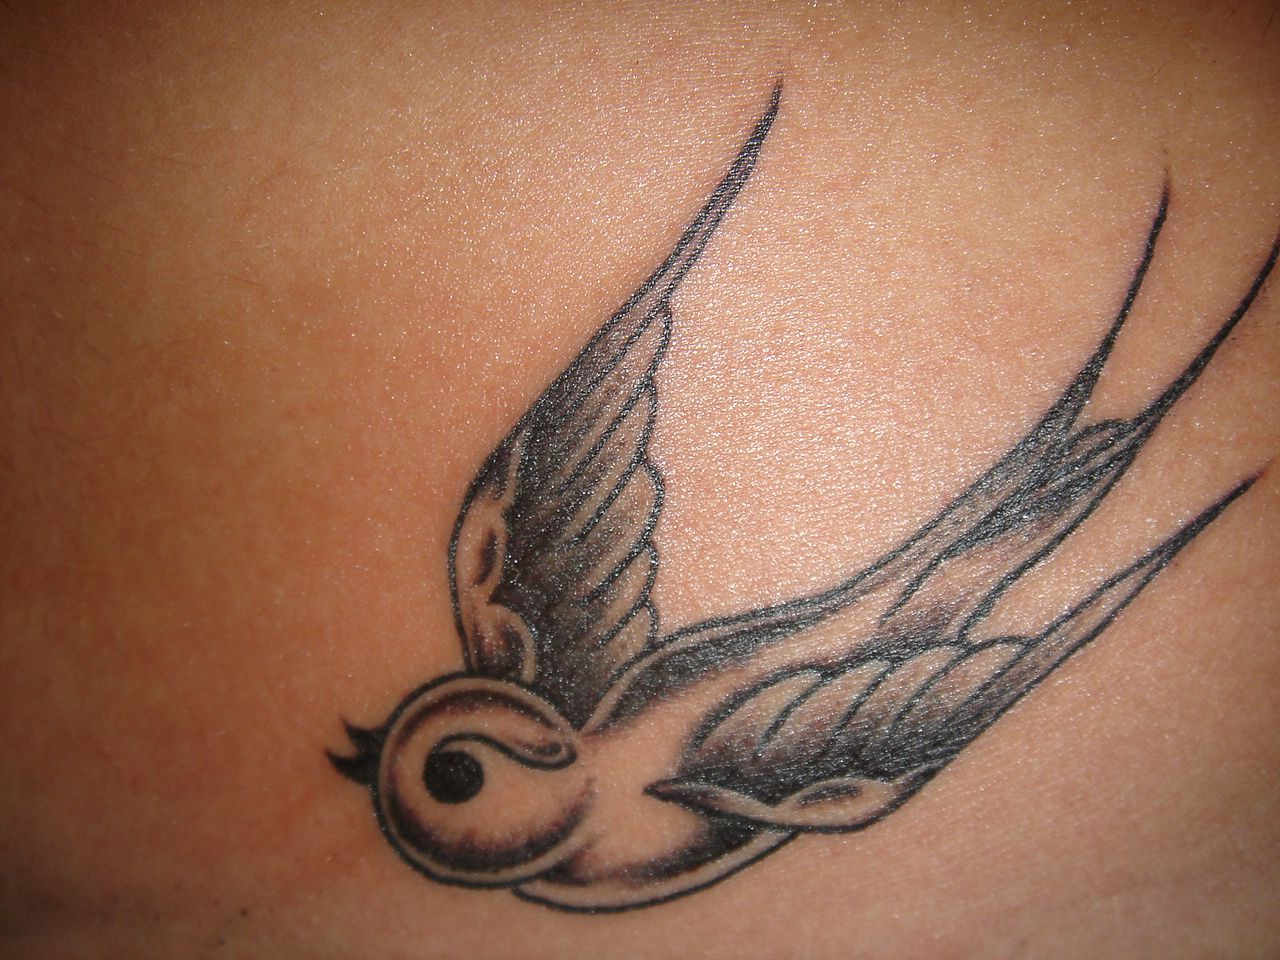 A Bird Tattoo Design Tattoos And Love Items Tattoos Small intended for dimensions 1280 X 960